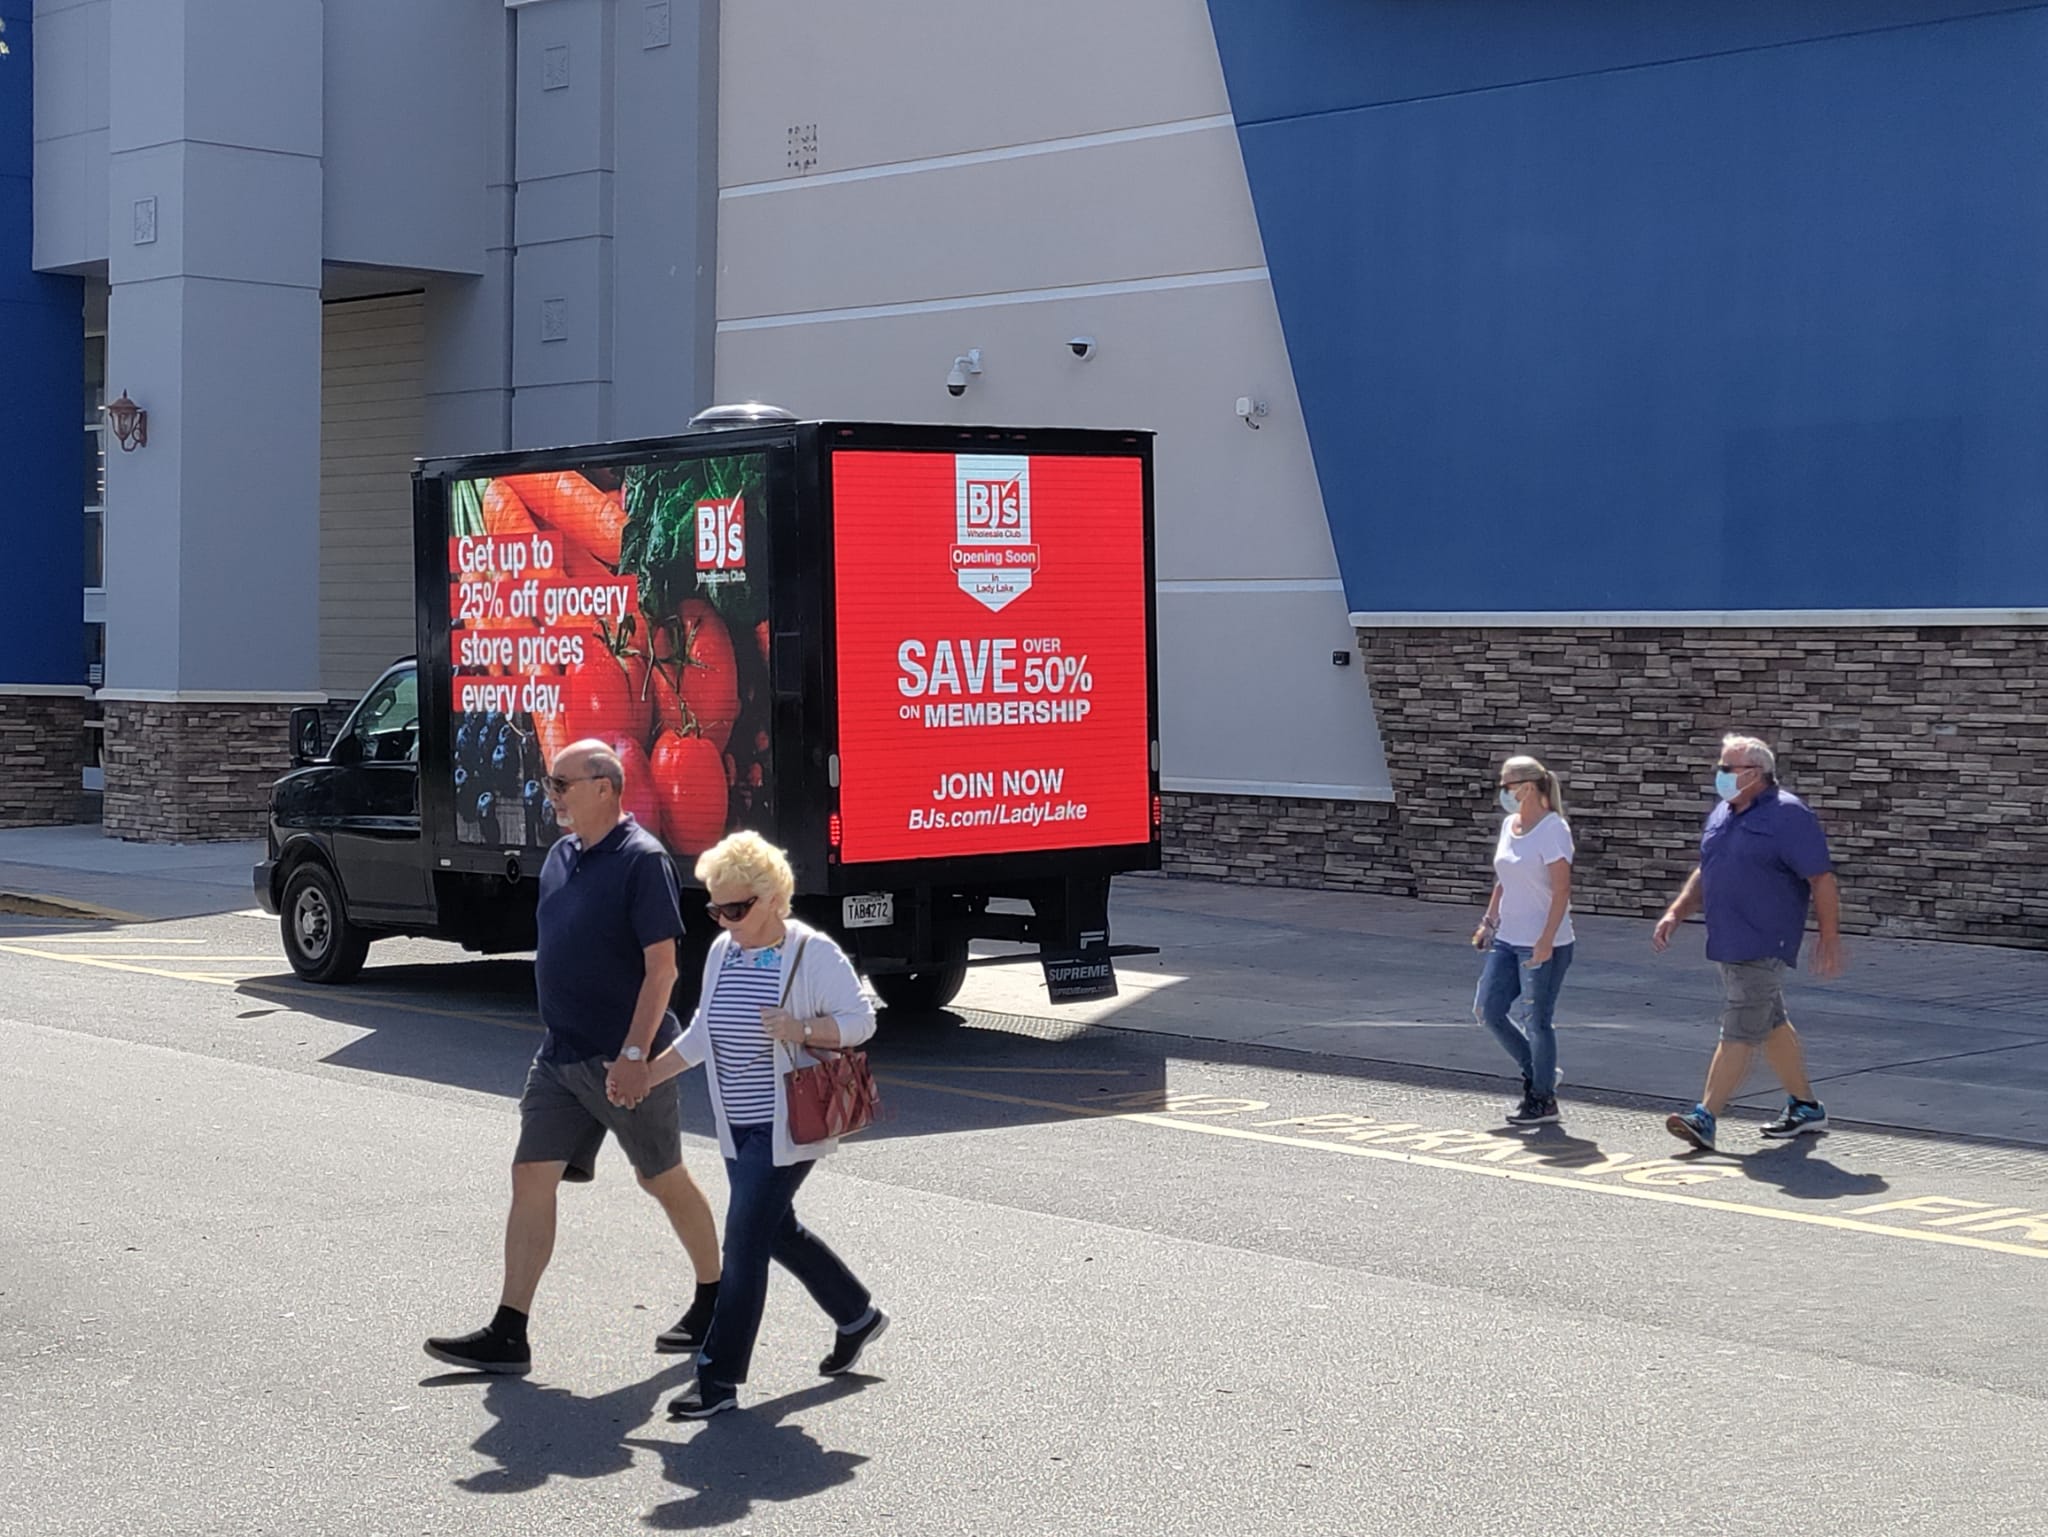 Mobile Billboard parked near store with people walking by. Ad shows red screen with strawberry